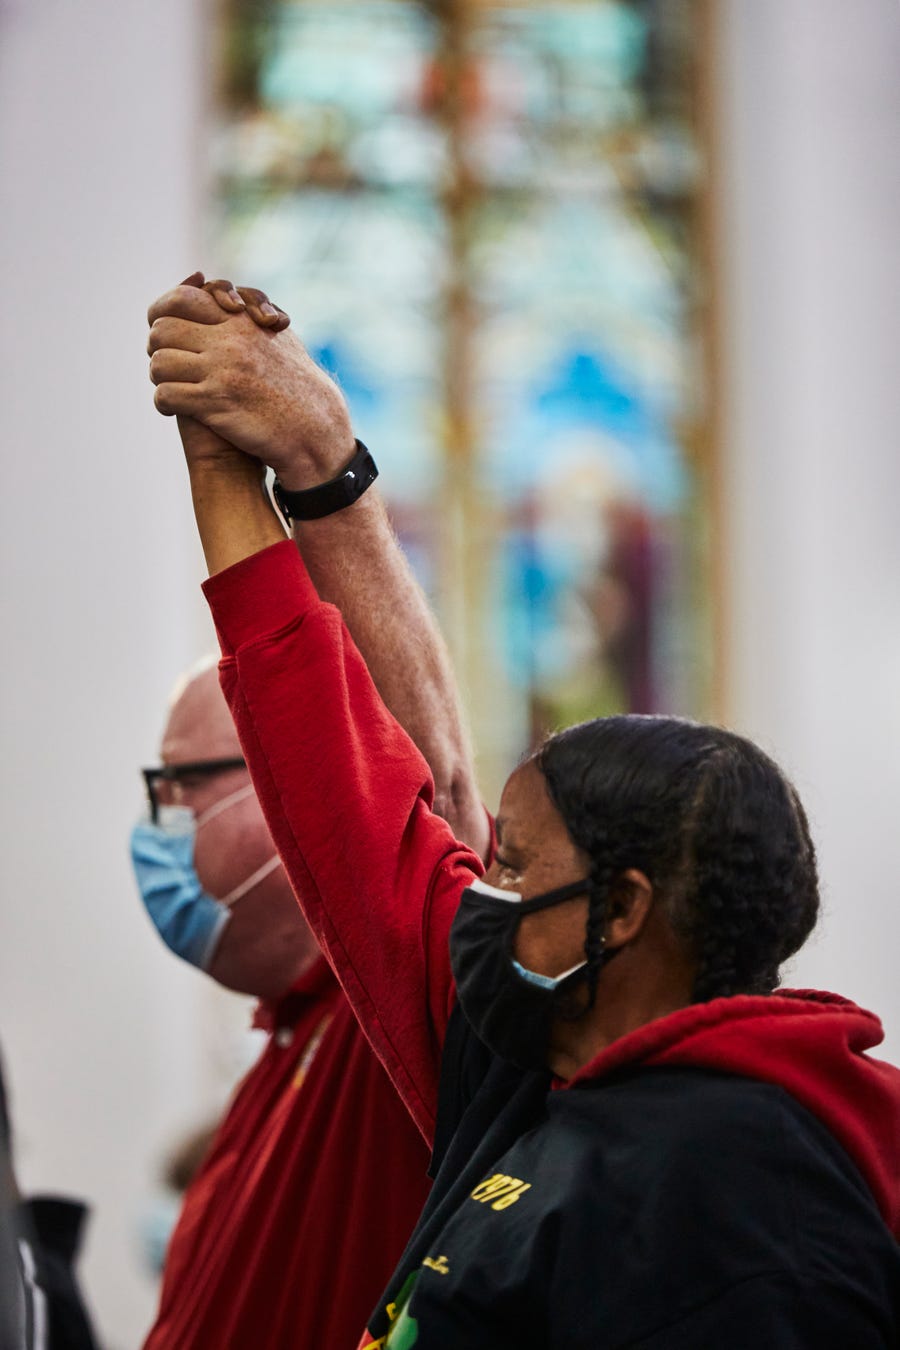 A service is held with the families and the community of Andre McNeil, Geraldine Talley and Ruth Whitfield at Antioch Baptist Church on May 19, 2022 in Buffalo, New York.